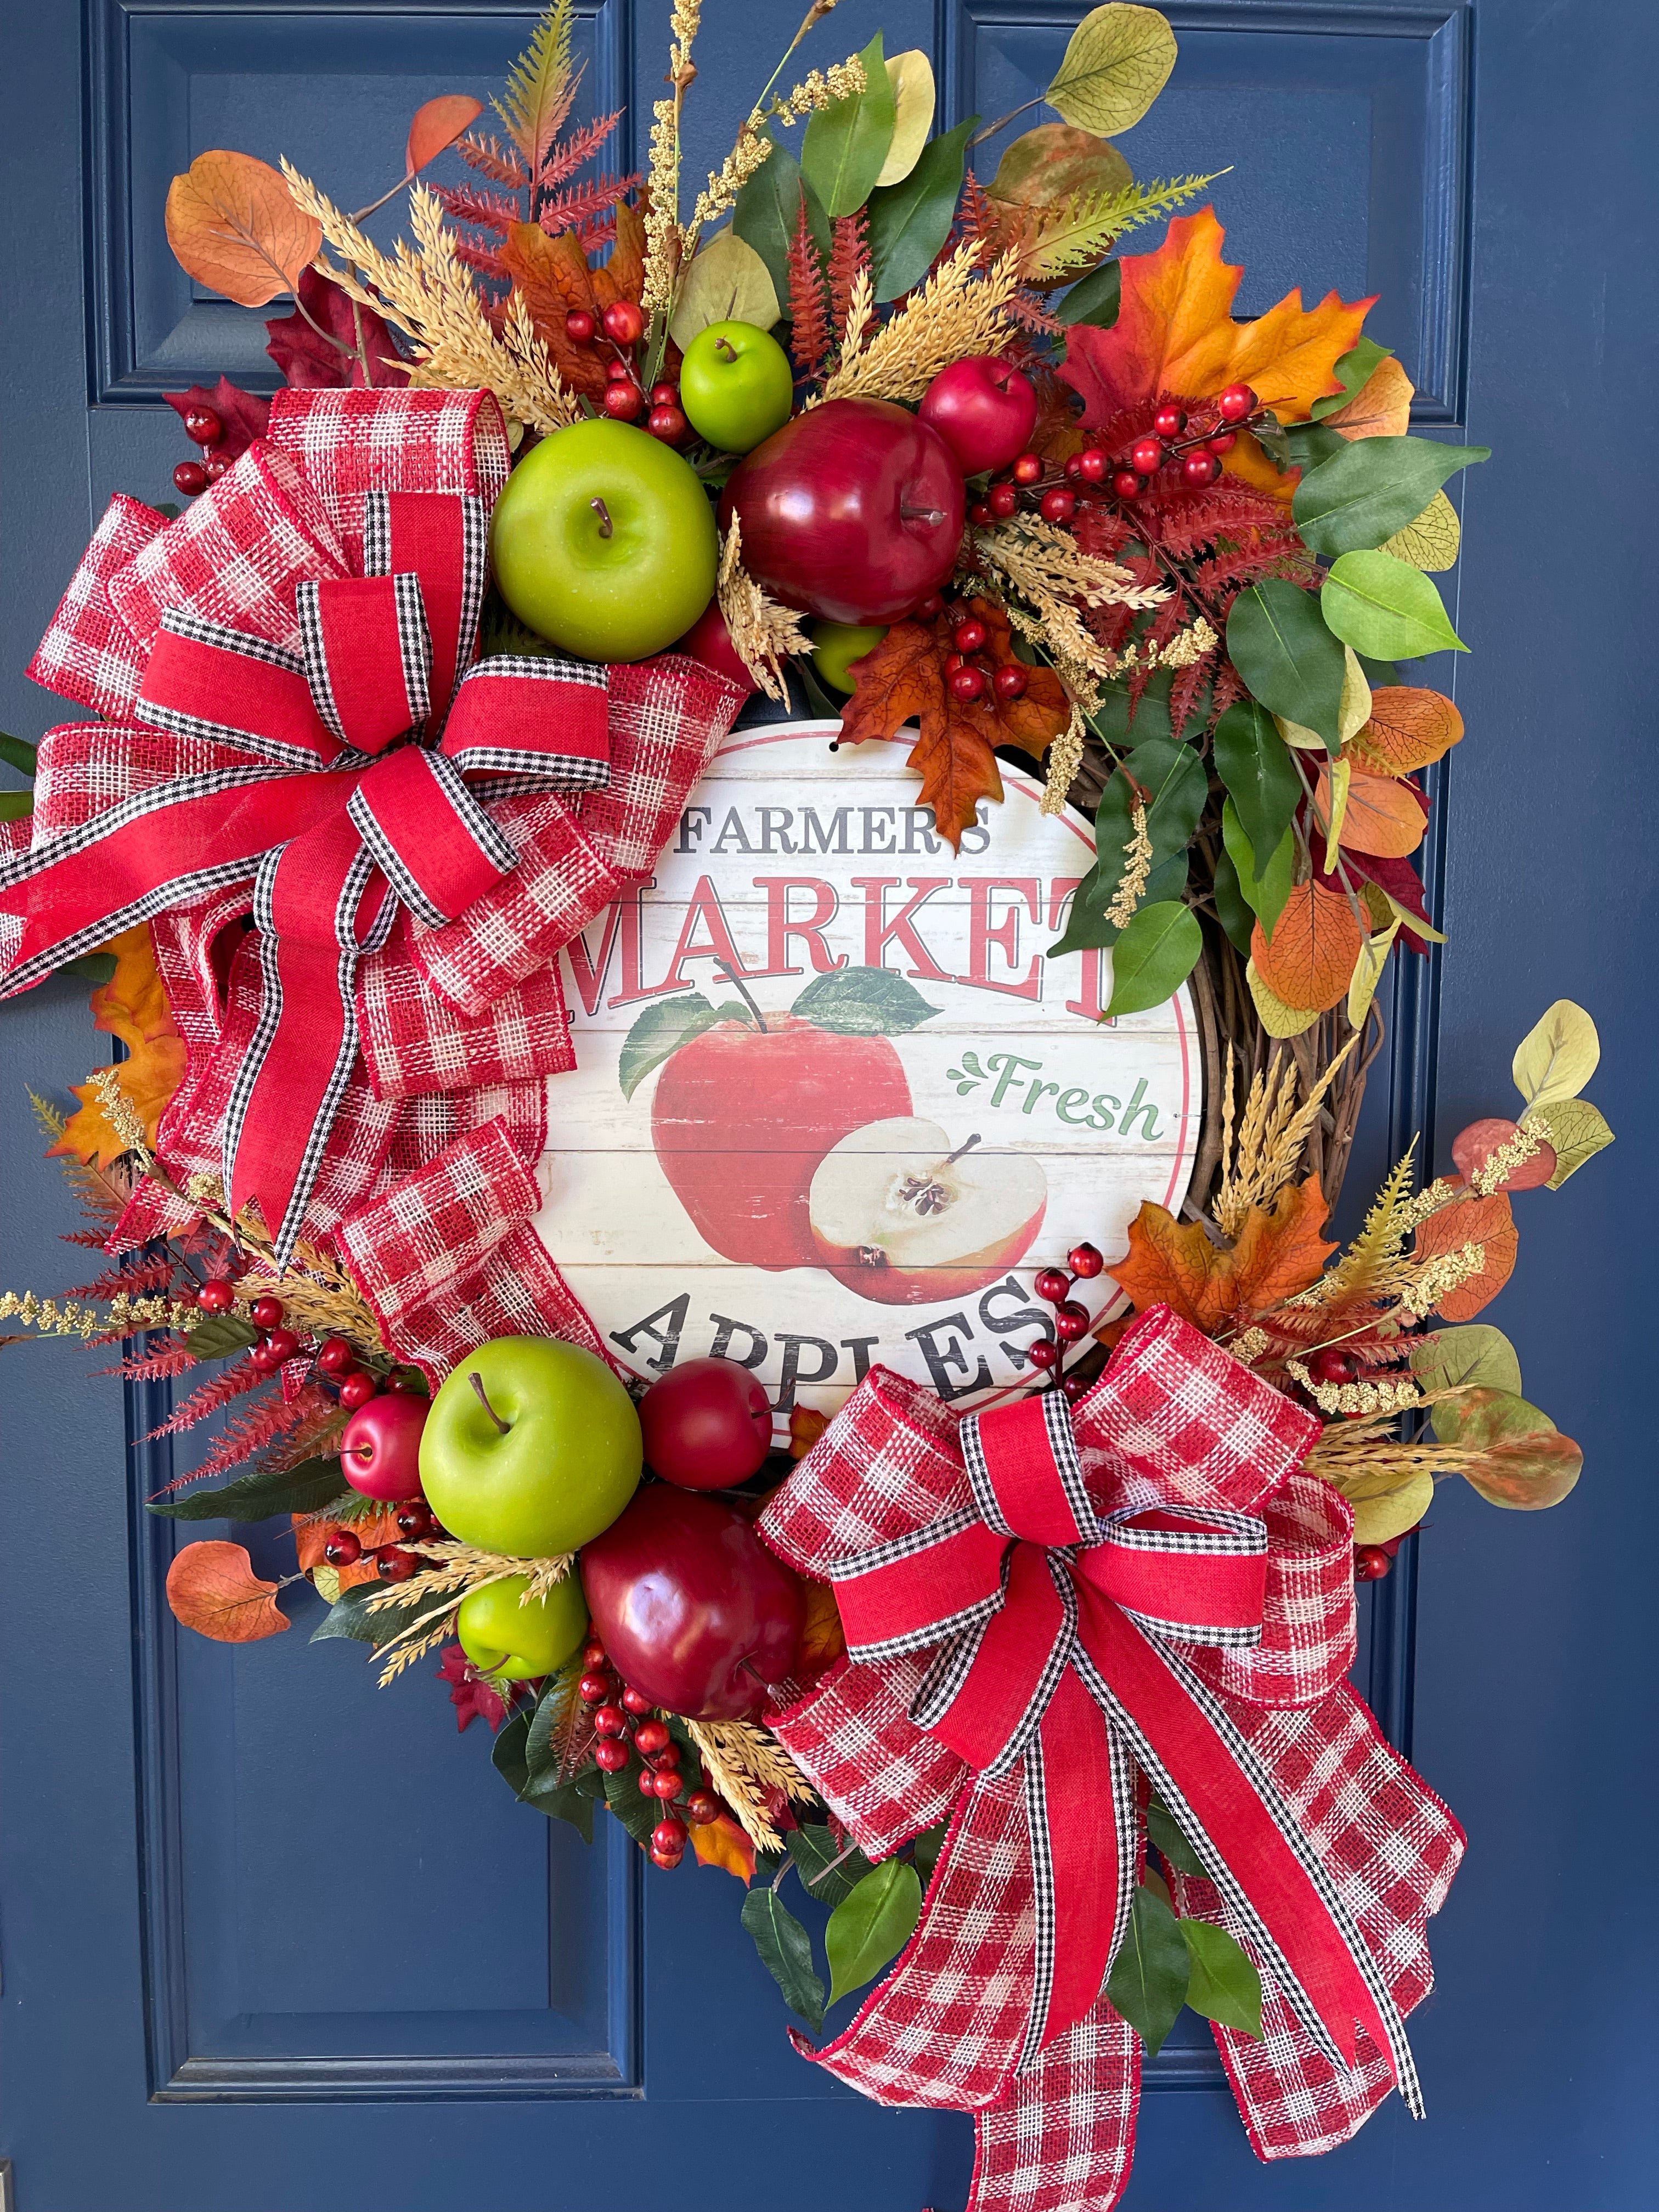 Fall Apple Grapevine Wreath filled with Red and Green Apples, Fall Leaves and Berries, Double Bows of Red, White and Black with a Farmers Market Fresh Apples Sign in the Center. 